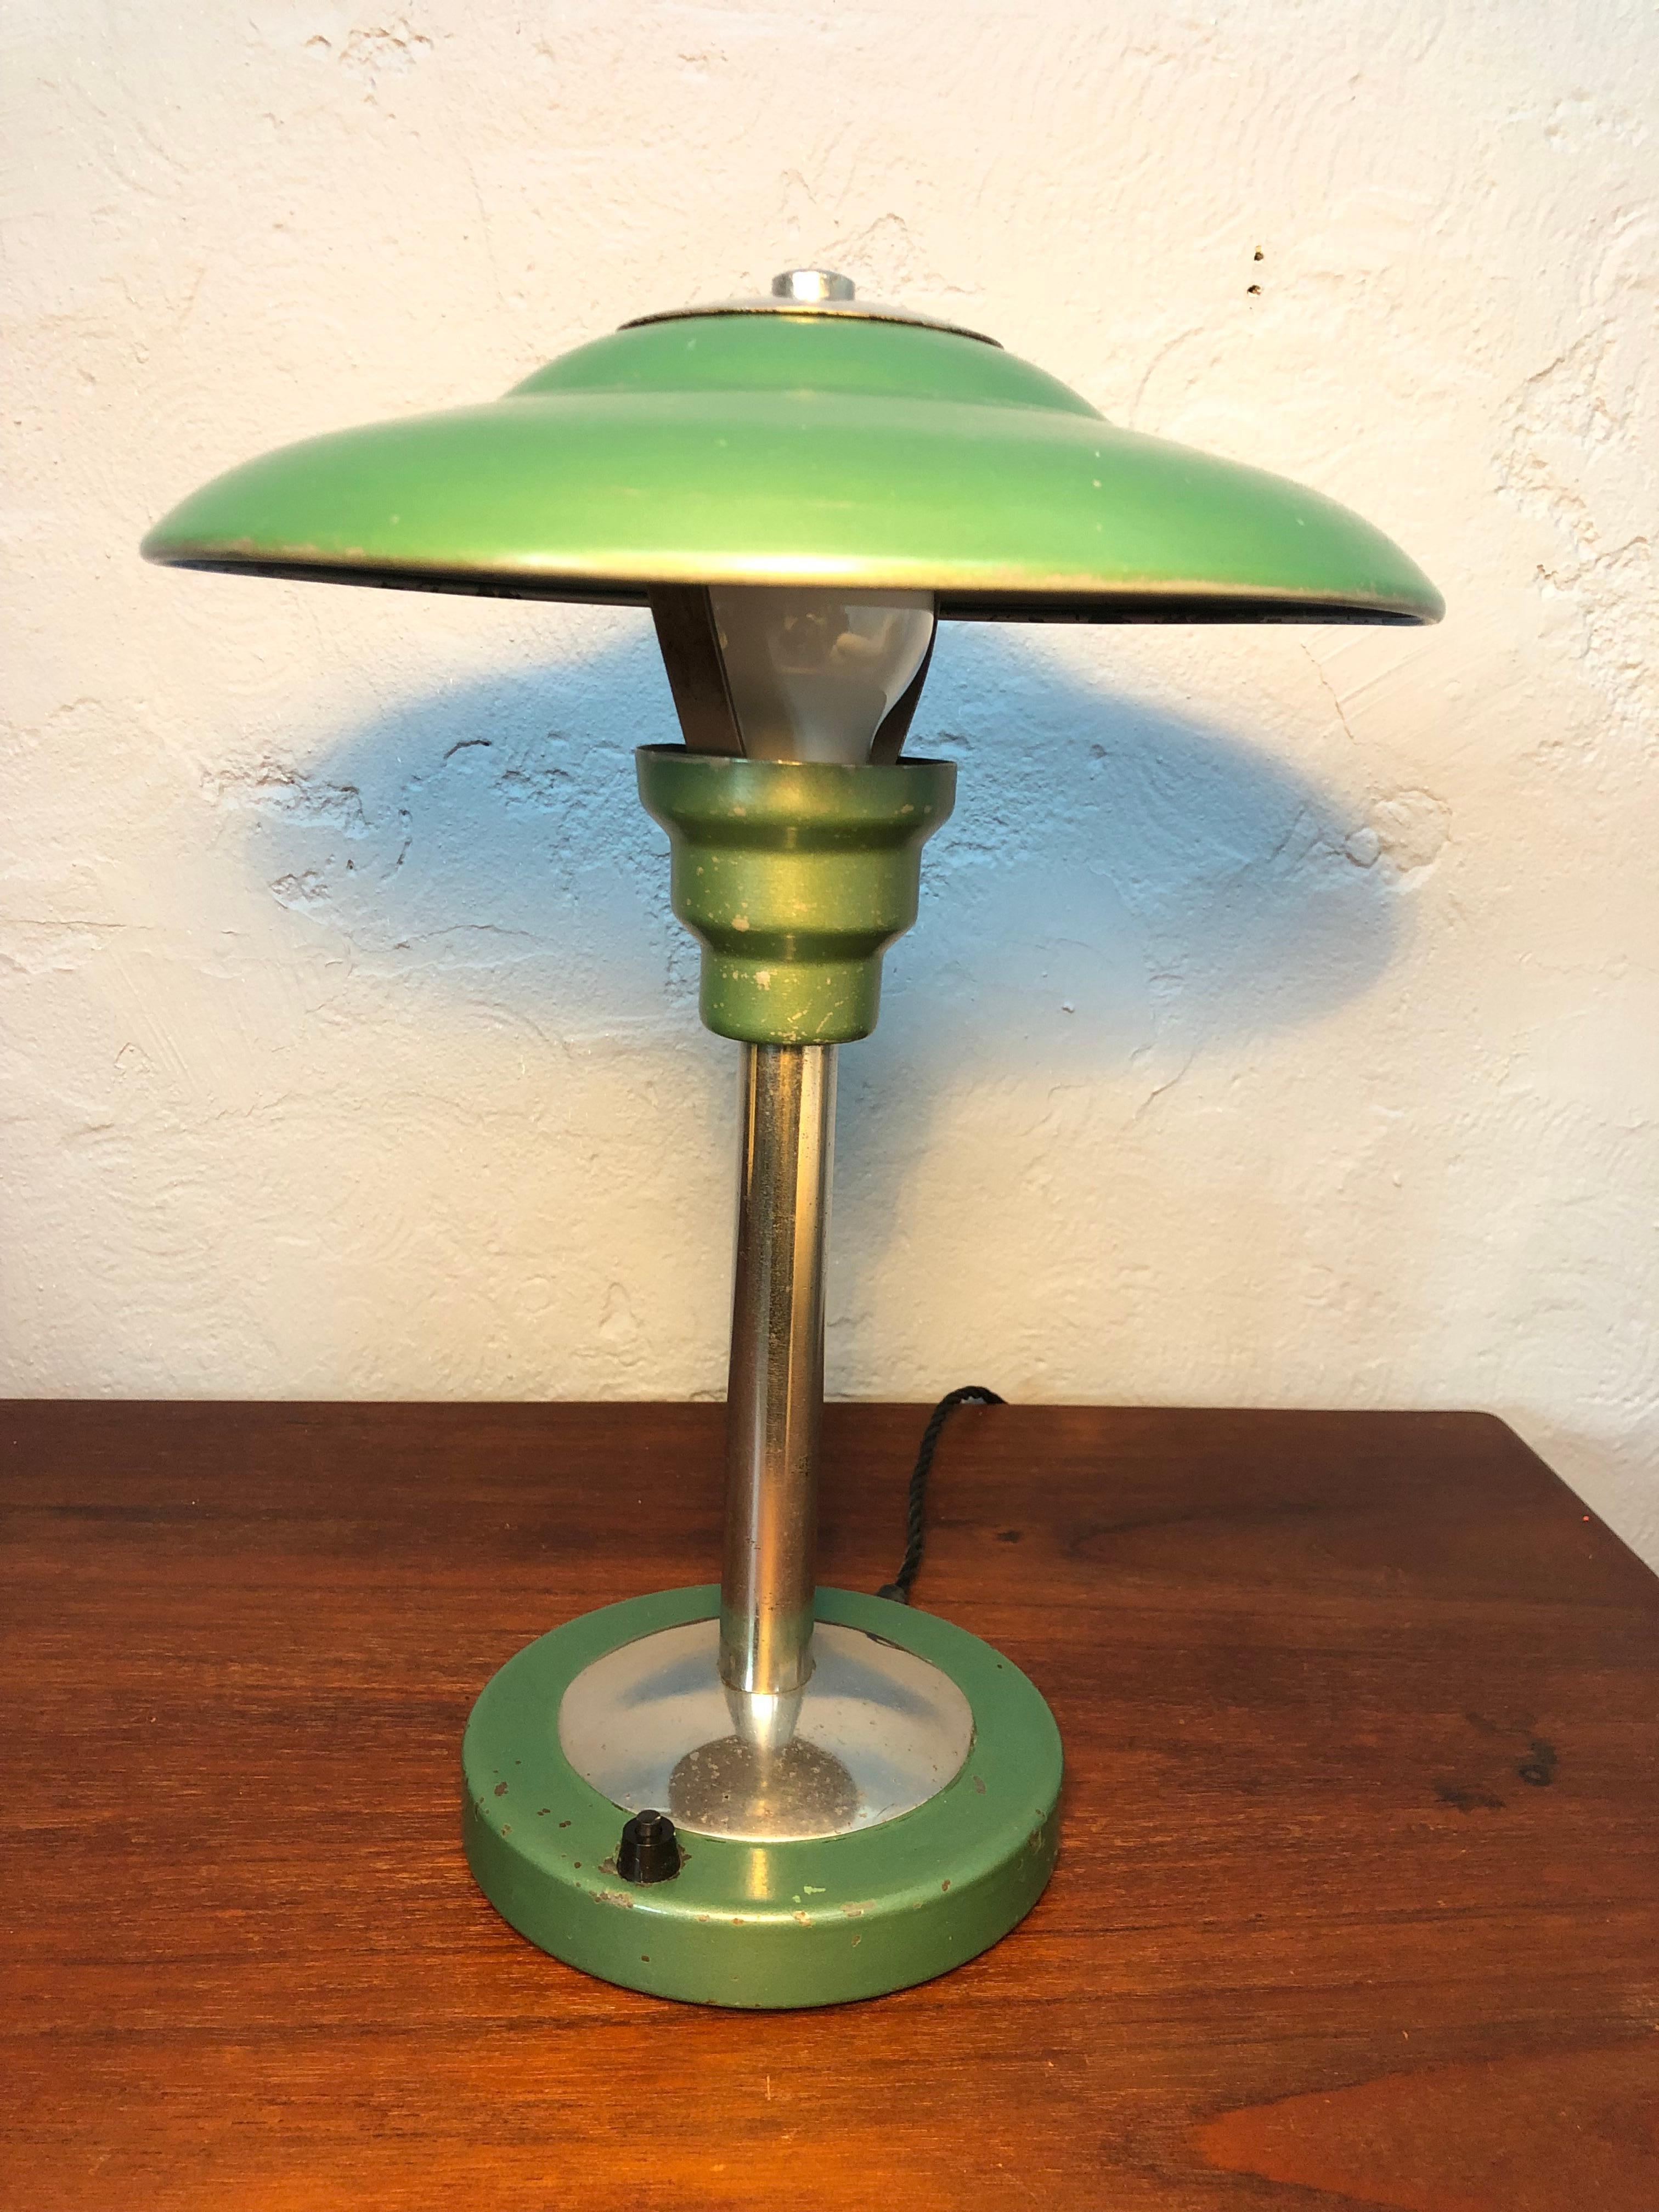 A Bauhaus table lamp in the manner of Max Schumacher of Germany. 
This classic Bauhaus lamp is in its original green paint with signs of wear from the around 70 years of use. 
The lamp has been dismantled cleaned and rewired with a black twisted